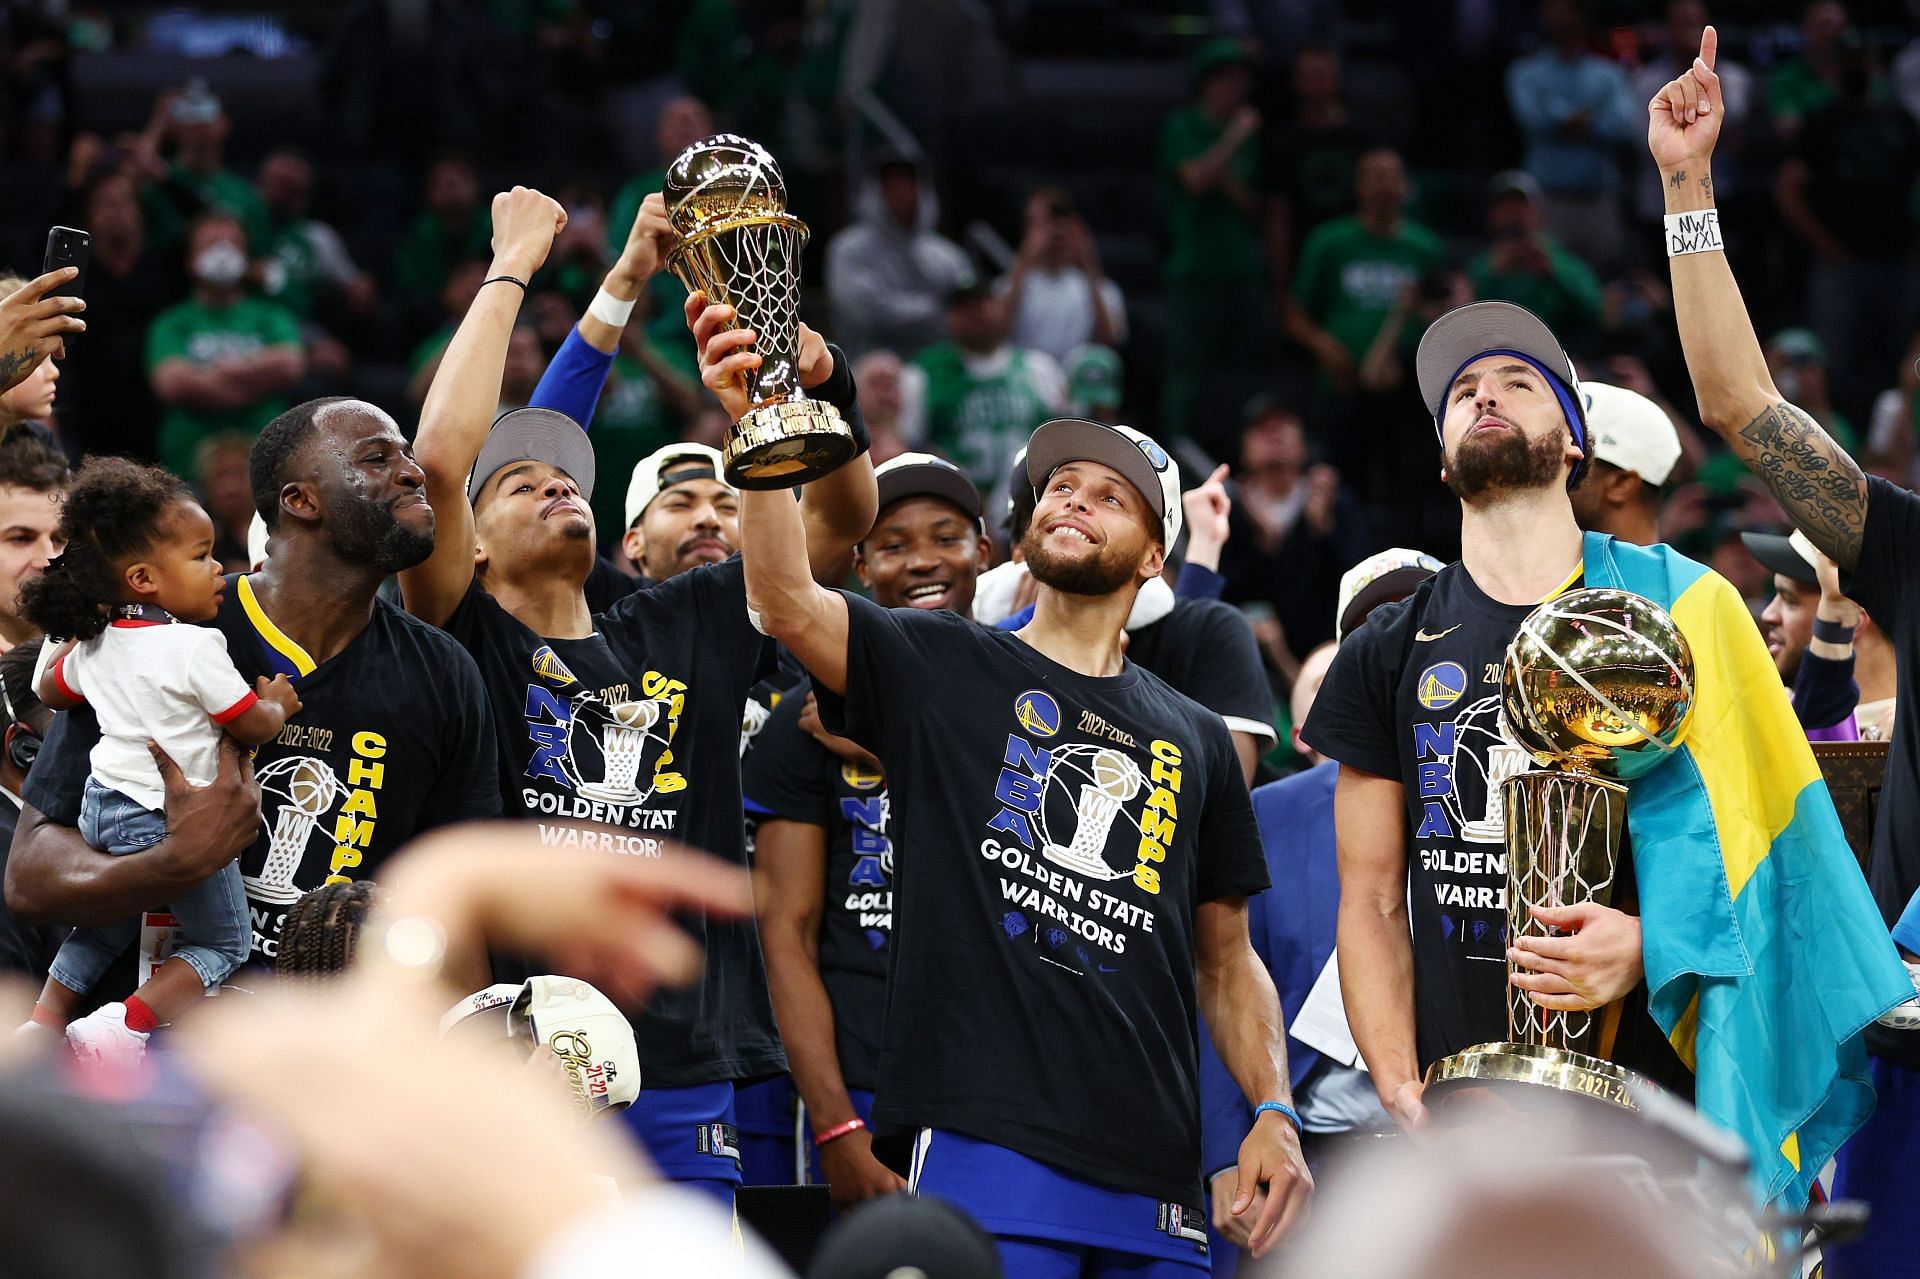 The Golden State Warriors celebrates winning their fourth title in eight seasons.